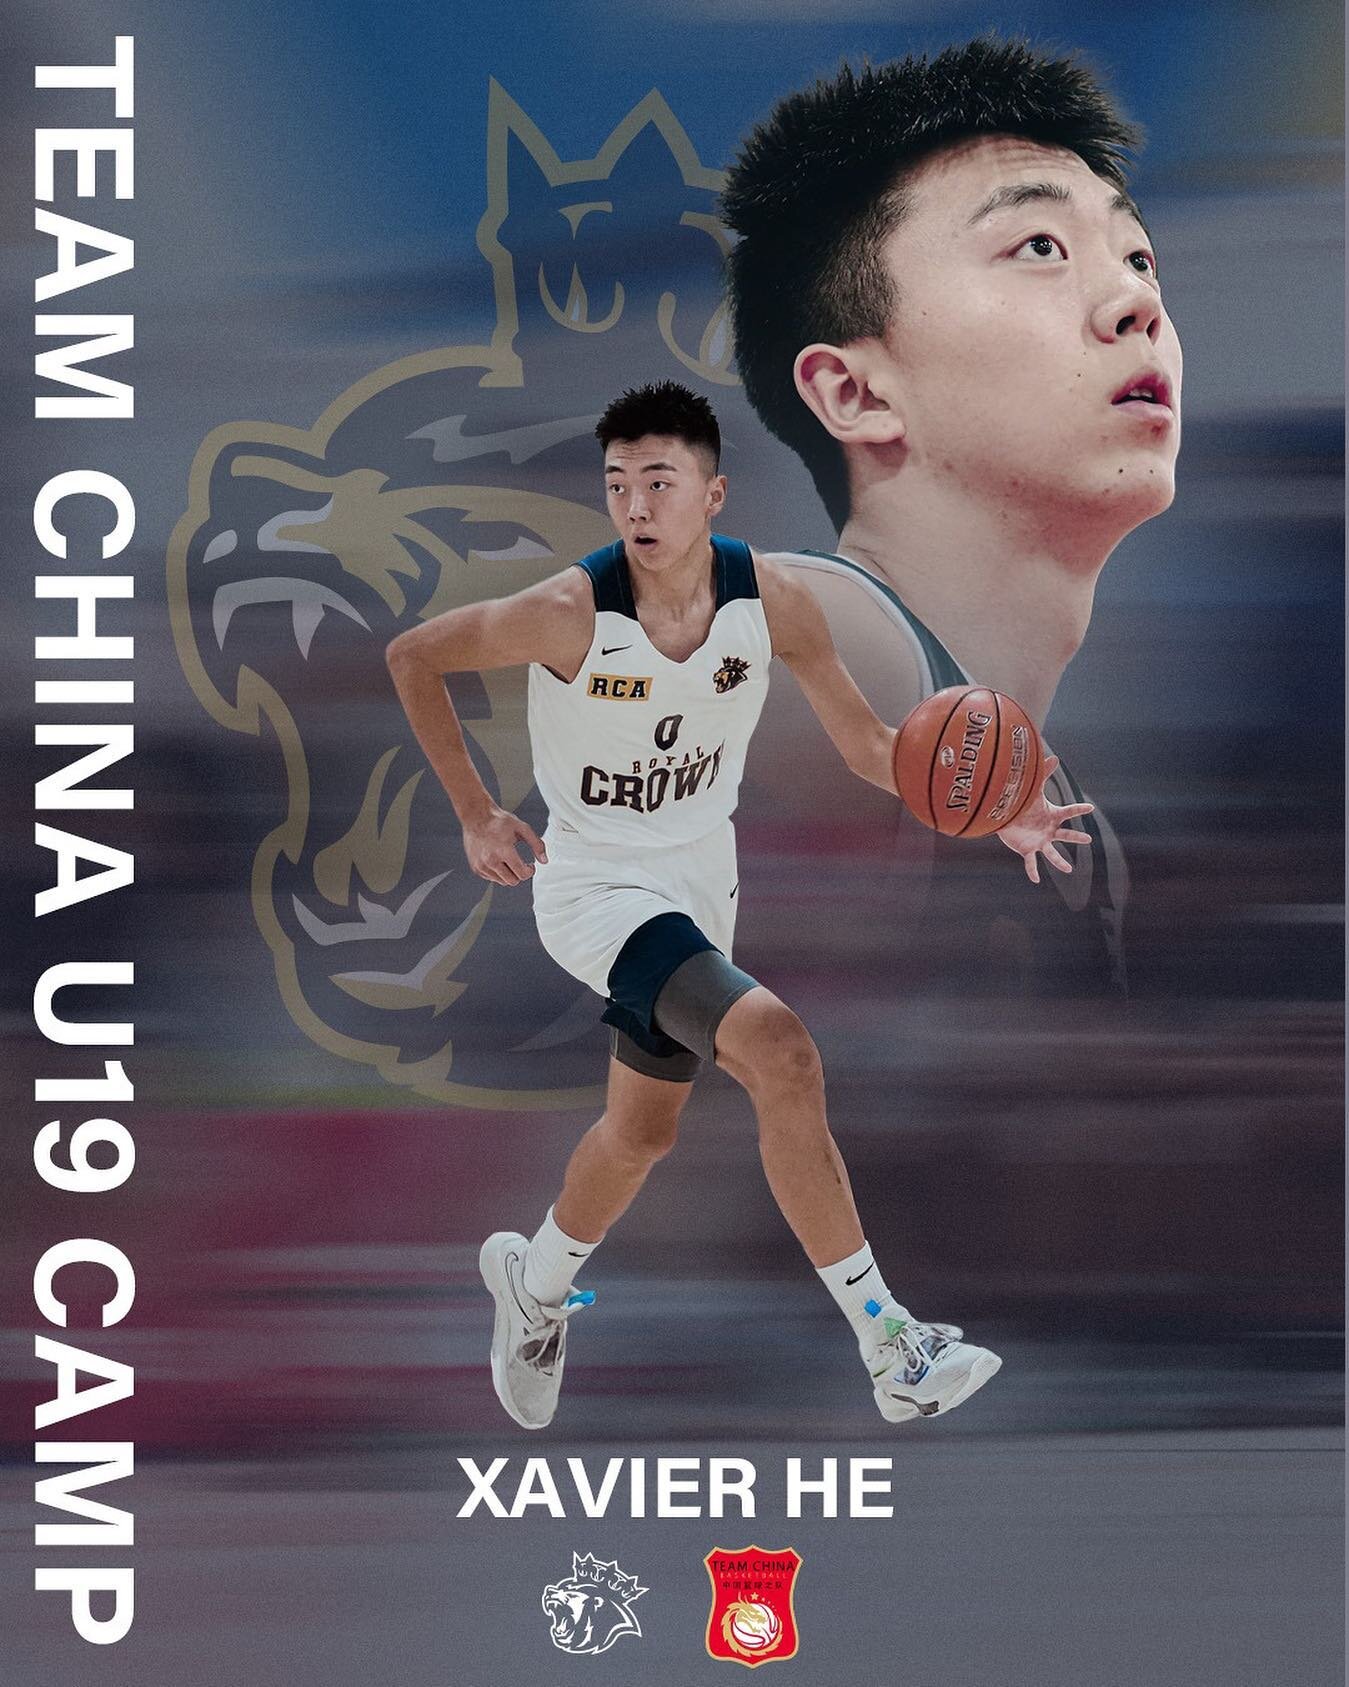 Congratulations to Xavier He who will be attending the Team China U19 Camp 🇨🇳 

#defendthecrown